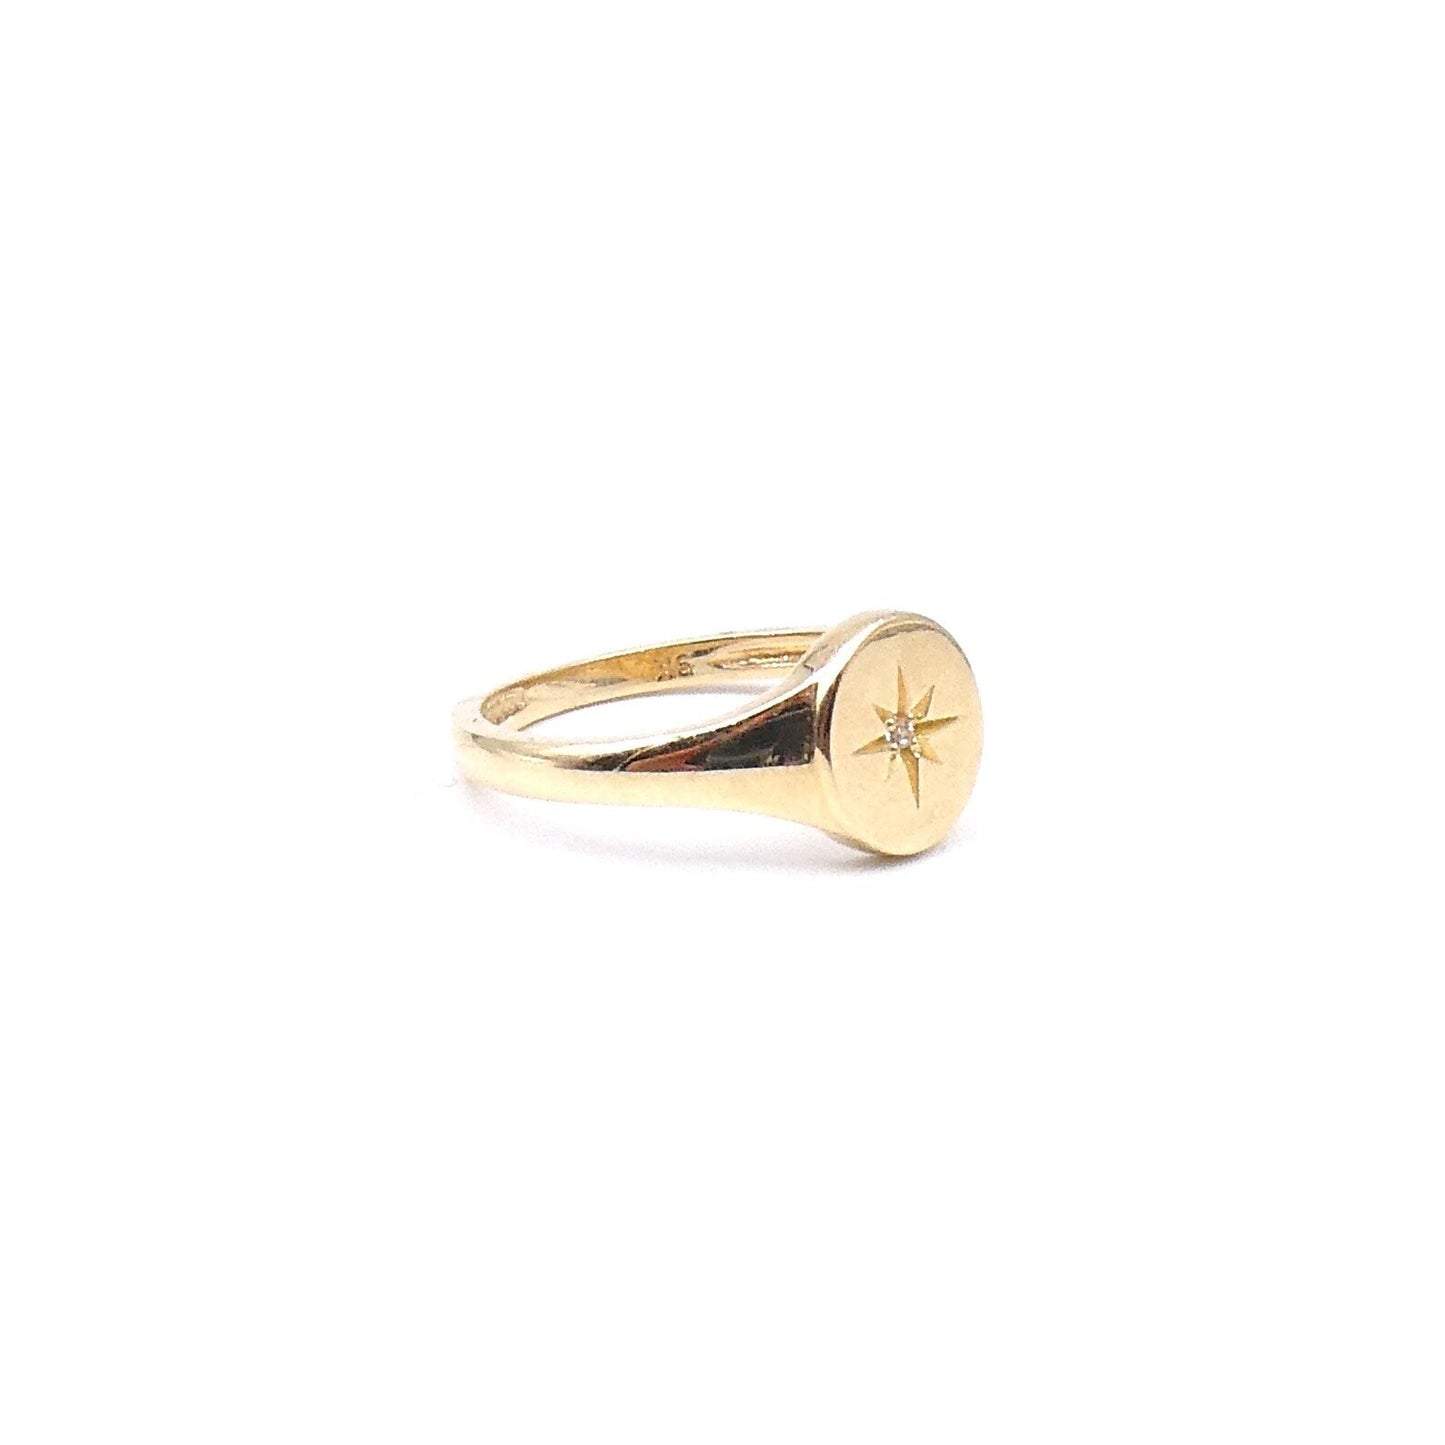 A signet ring engraved with a star, set with a crystal, 9kt gold oval signet ring. - Collected